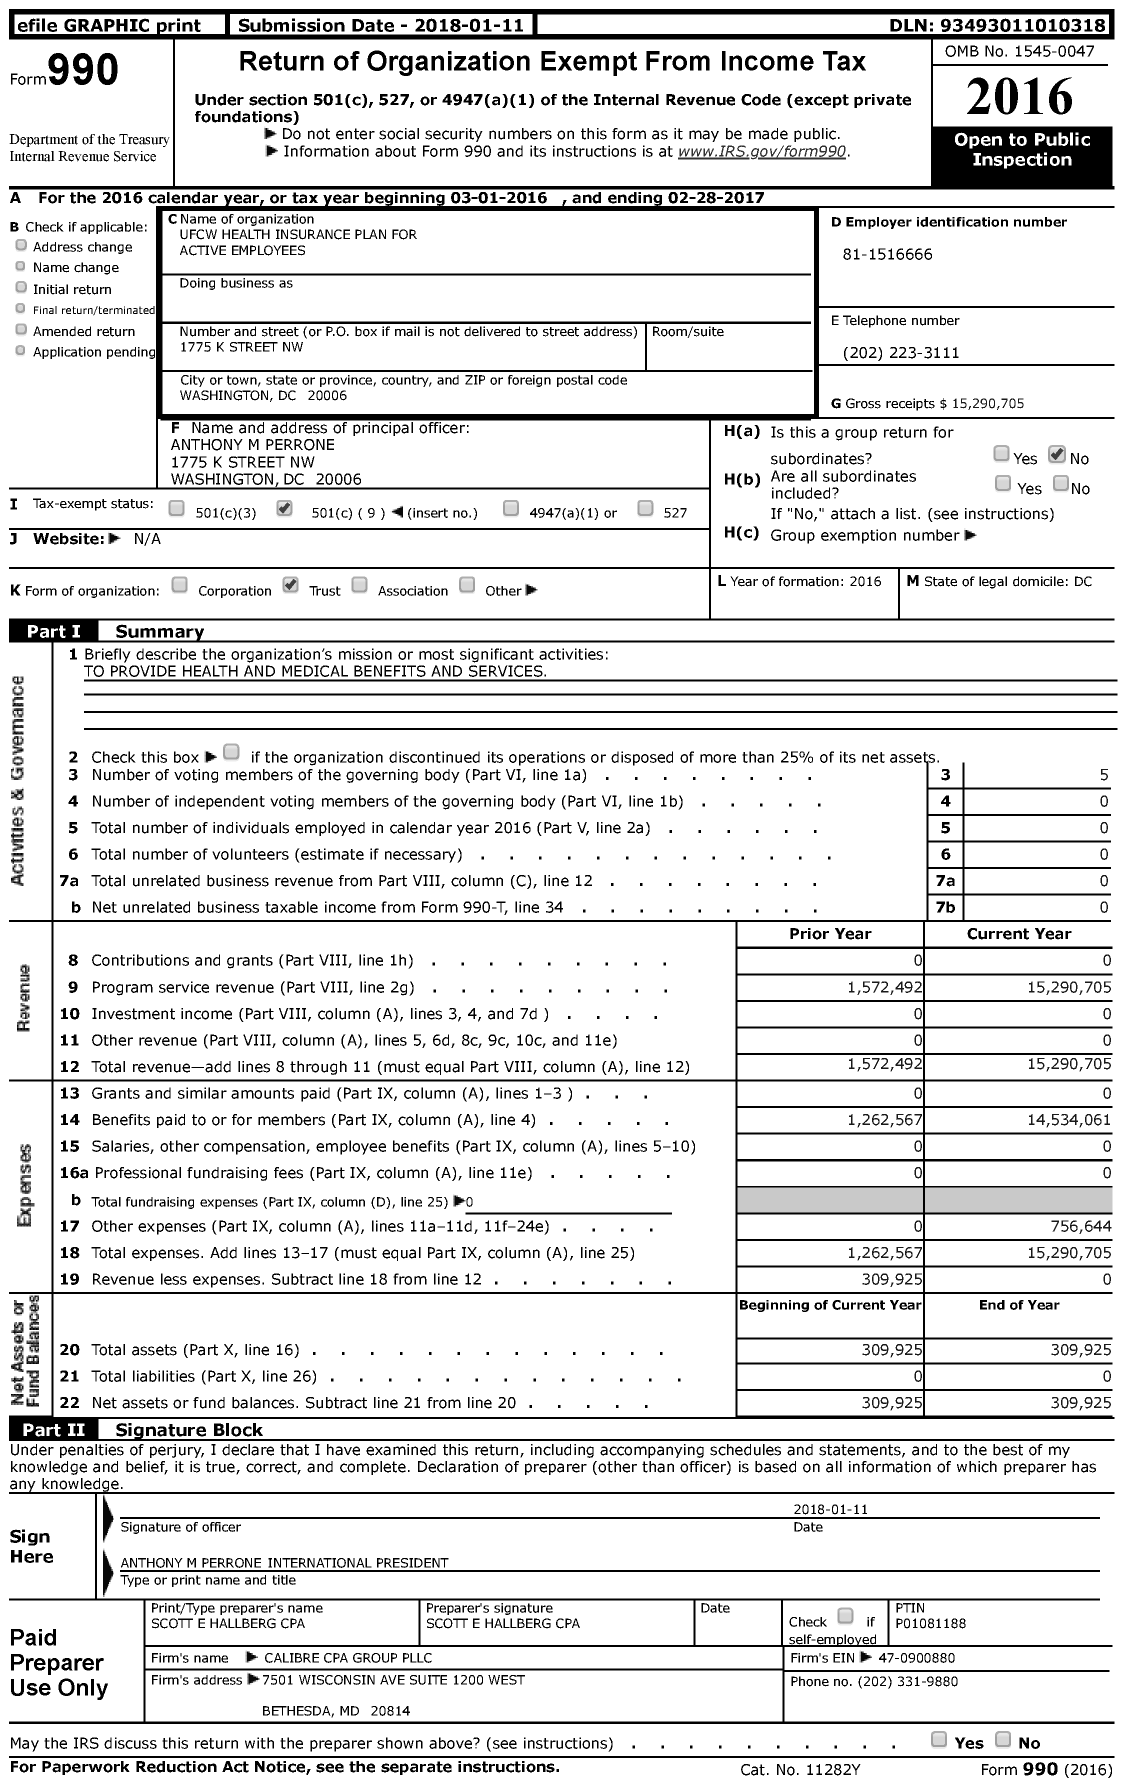 Image of first page of 2016 Form 990 for Ufcw Health Insurance Plan for Active Employees